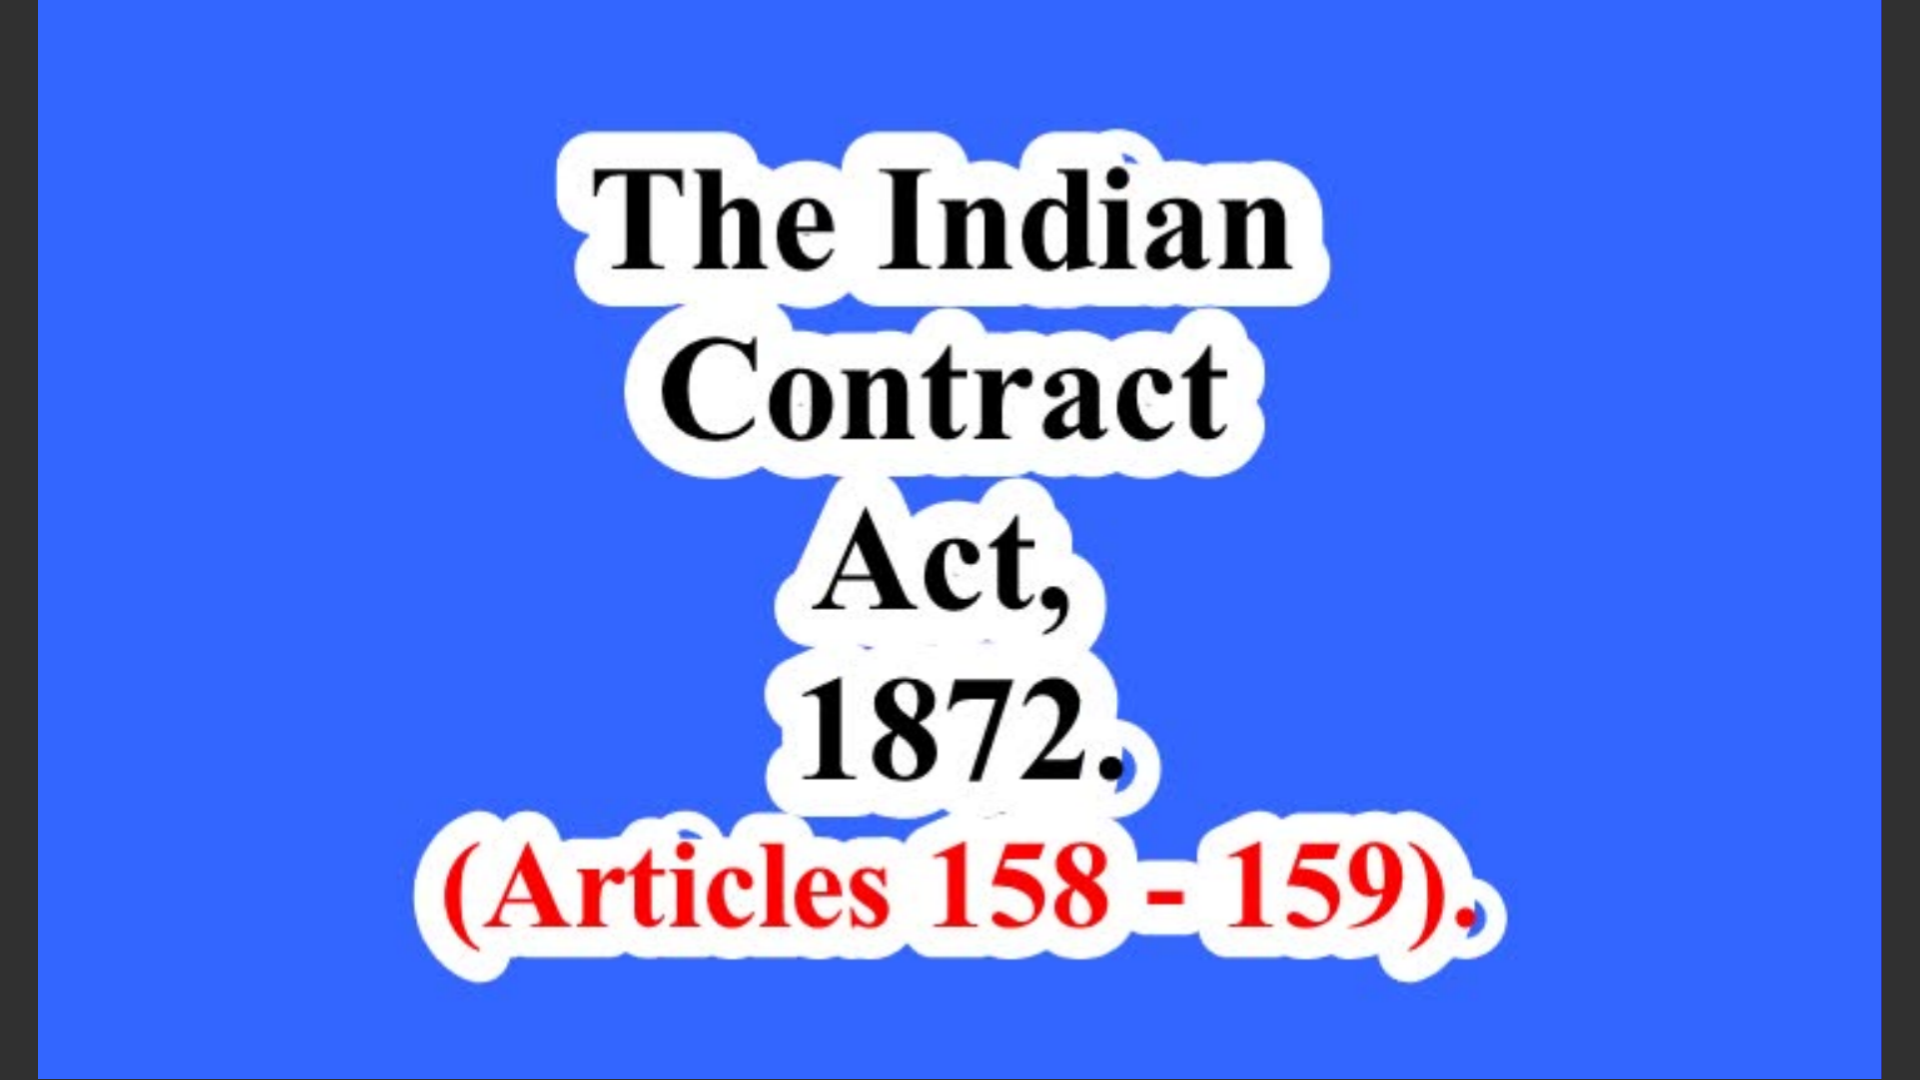 The Indian Contract Act, 1872. (Articles 158 – 159).